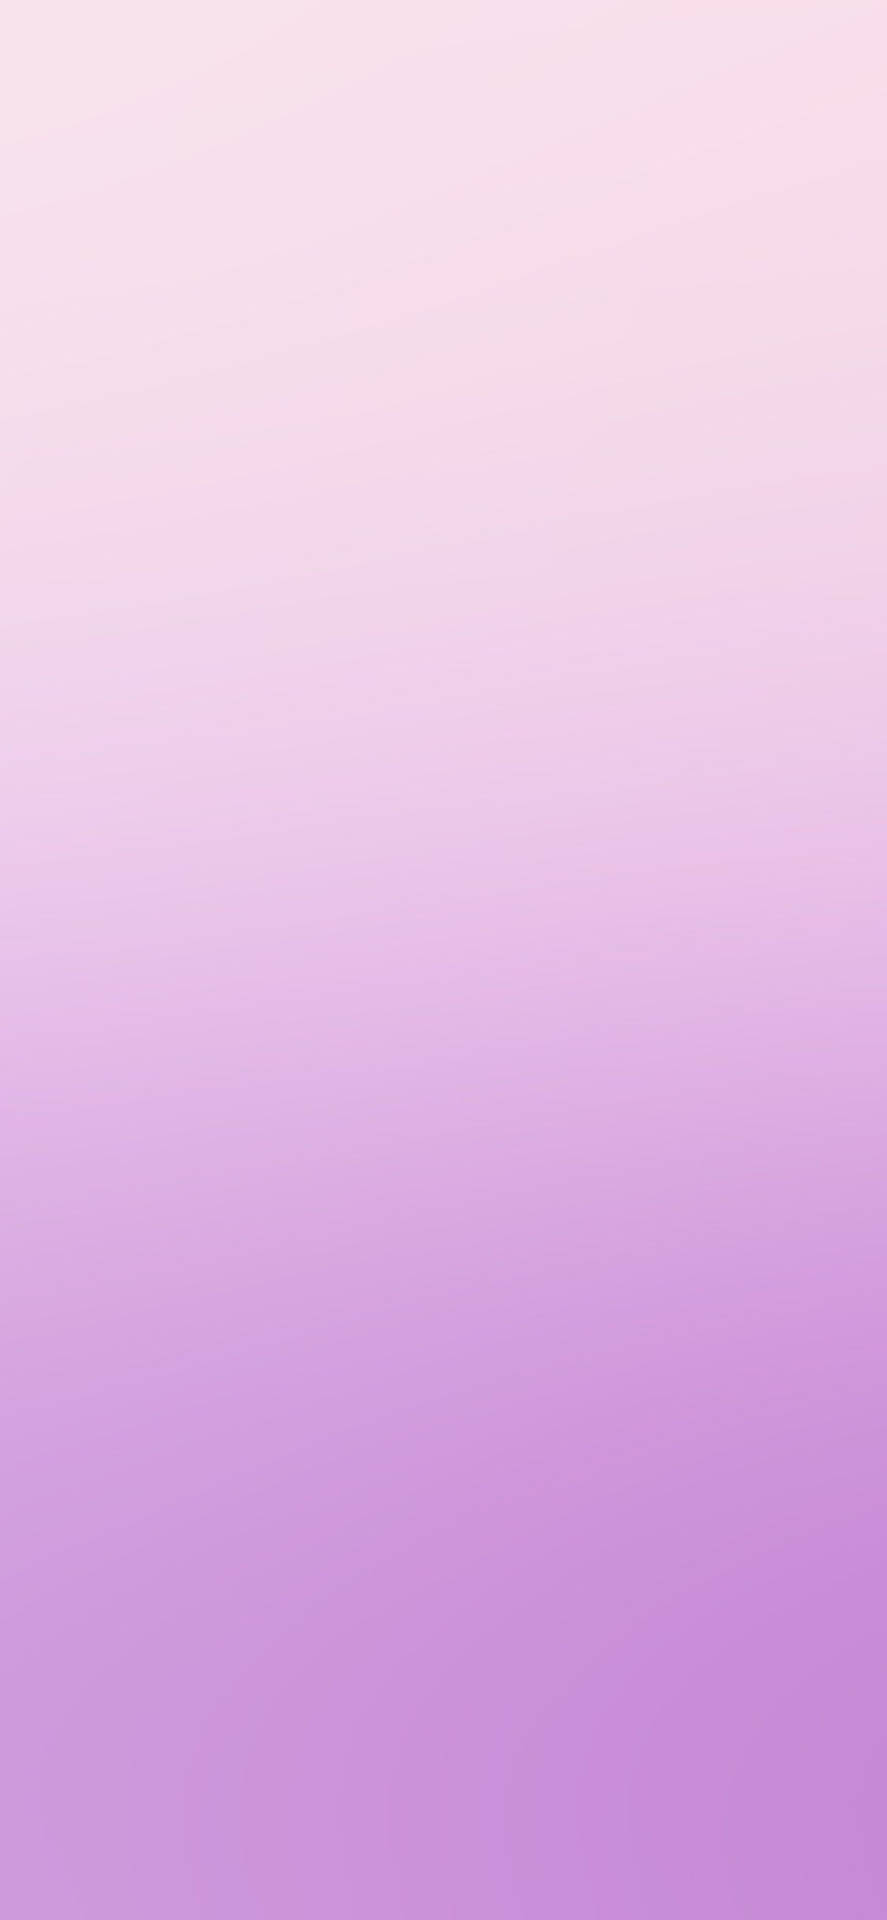 Wallpaper background iPhone Android HD pink purple gradient